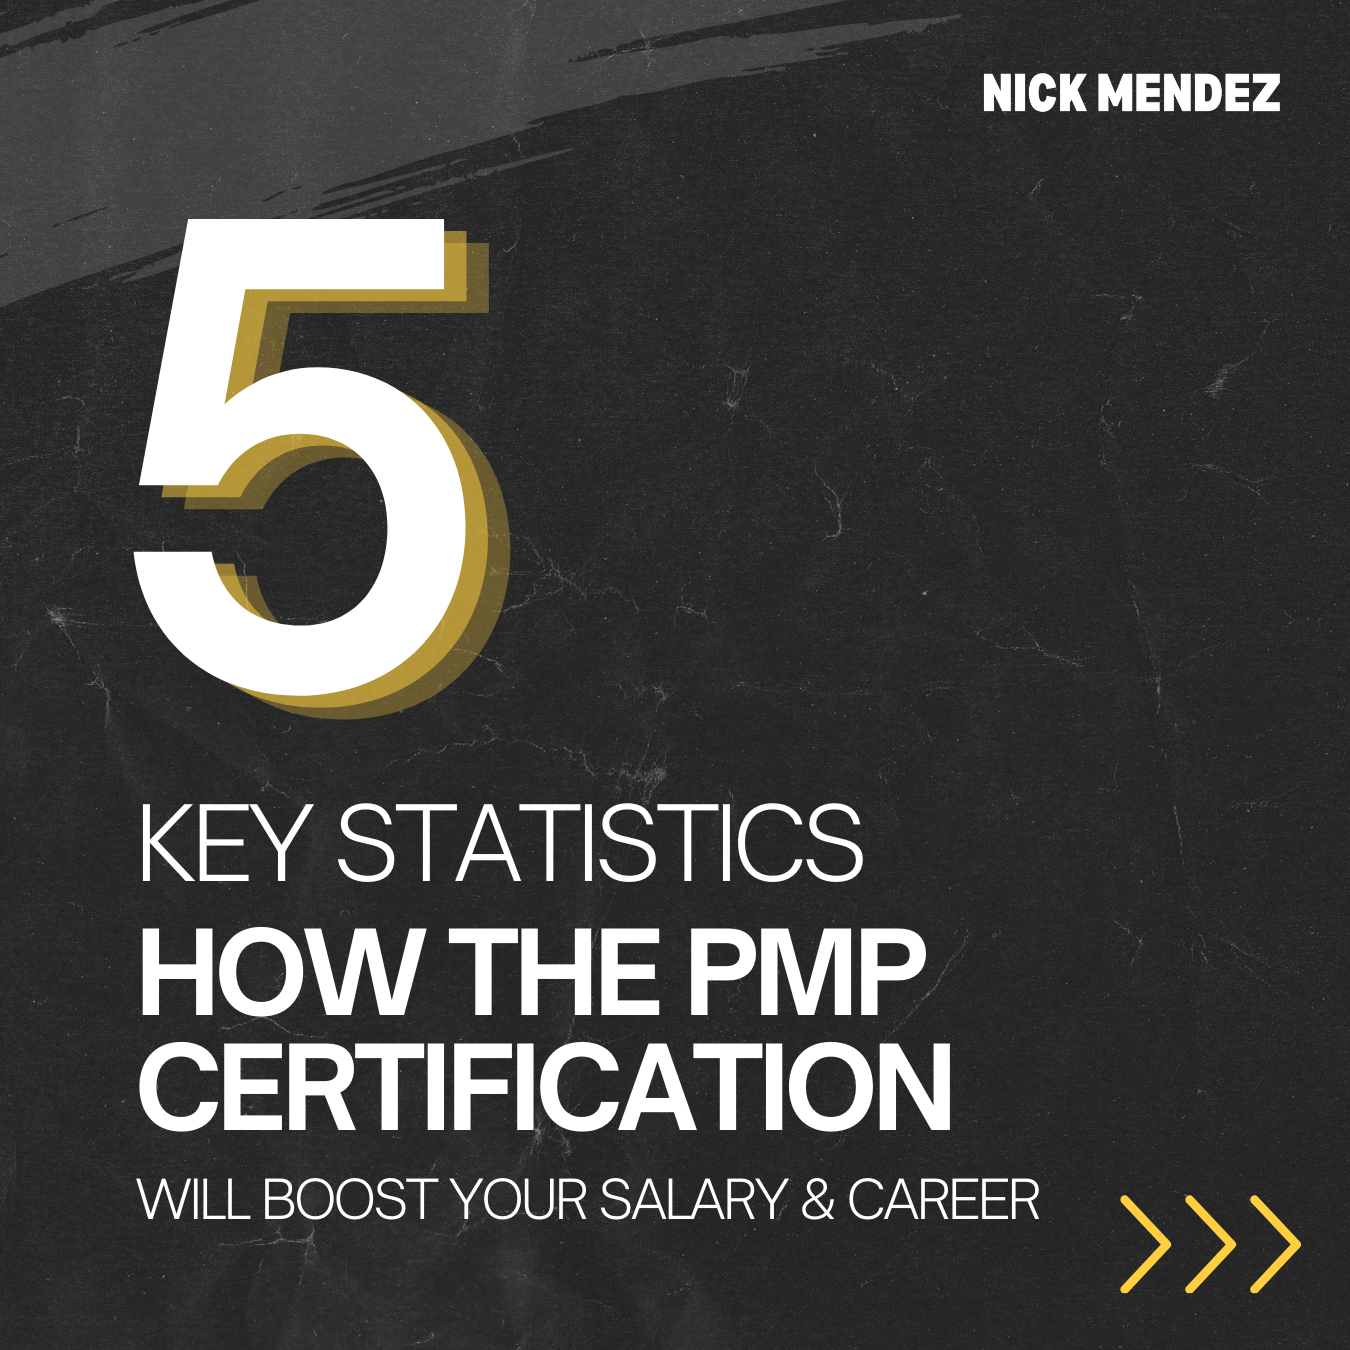 5 Key Statistics How the PMP Certification Will Boost Your Salary & Career by Nick Mendez